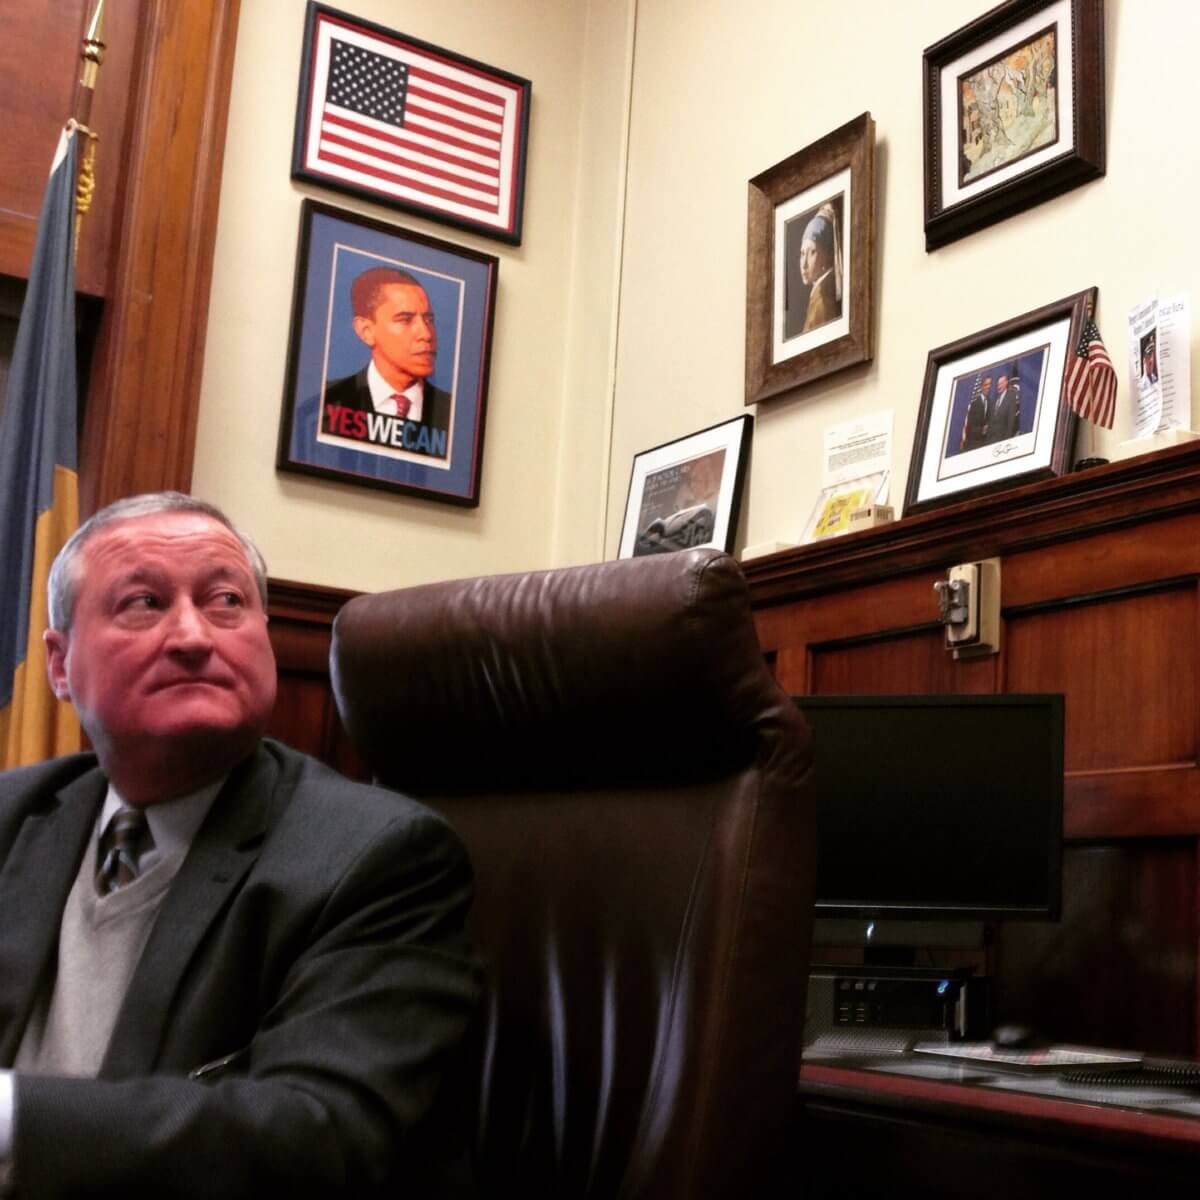 Jim Kenney to resign from council, announce his bid for mayor